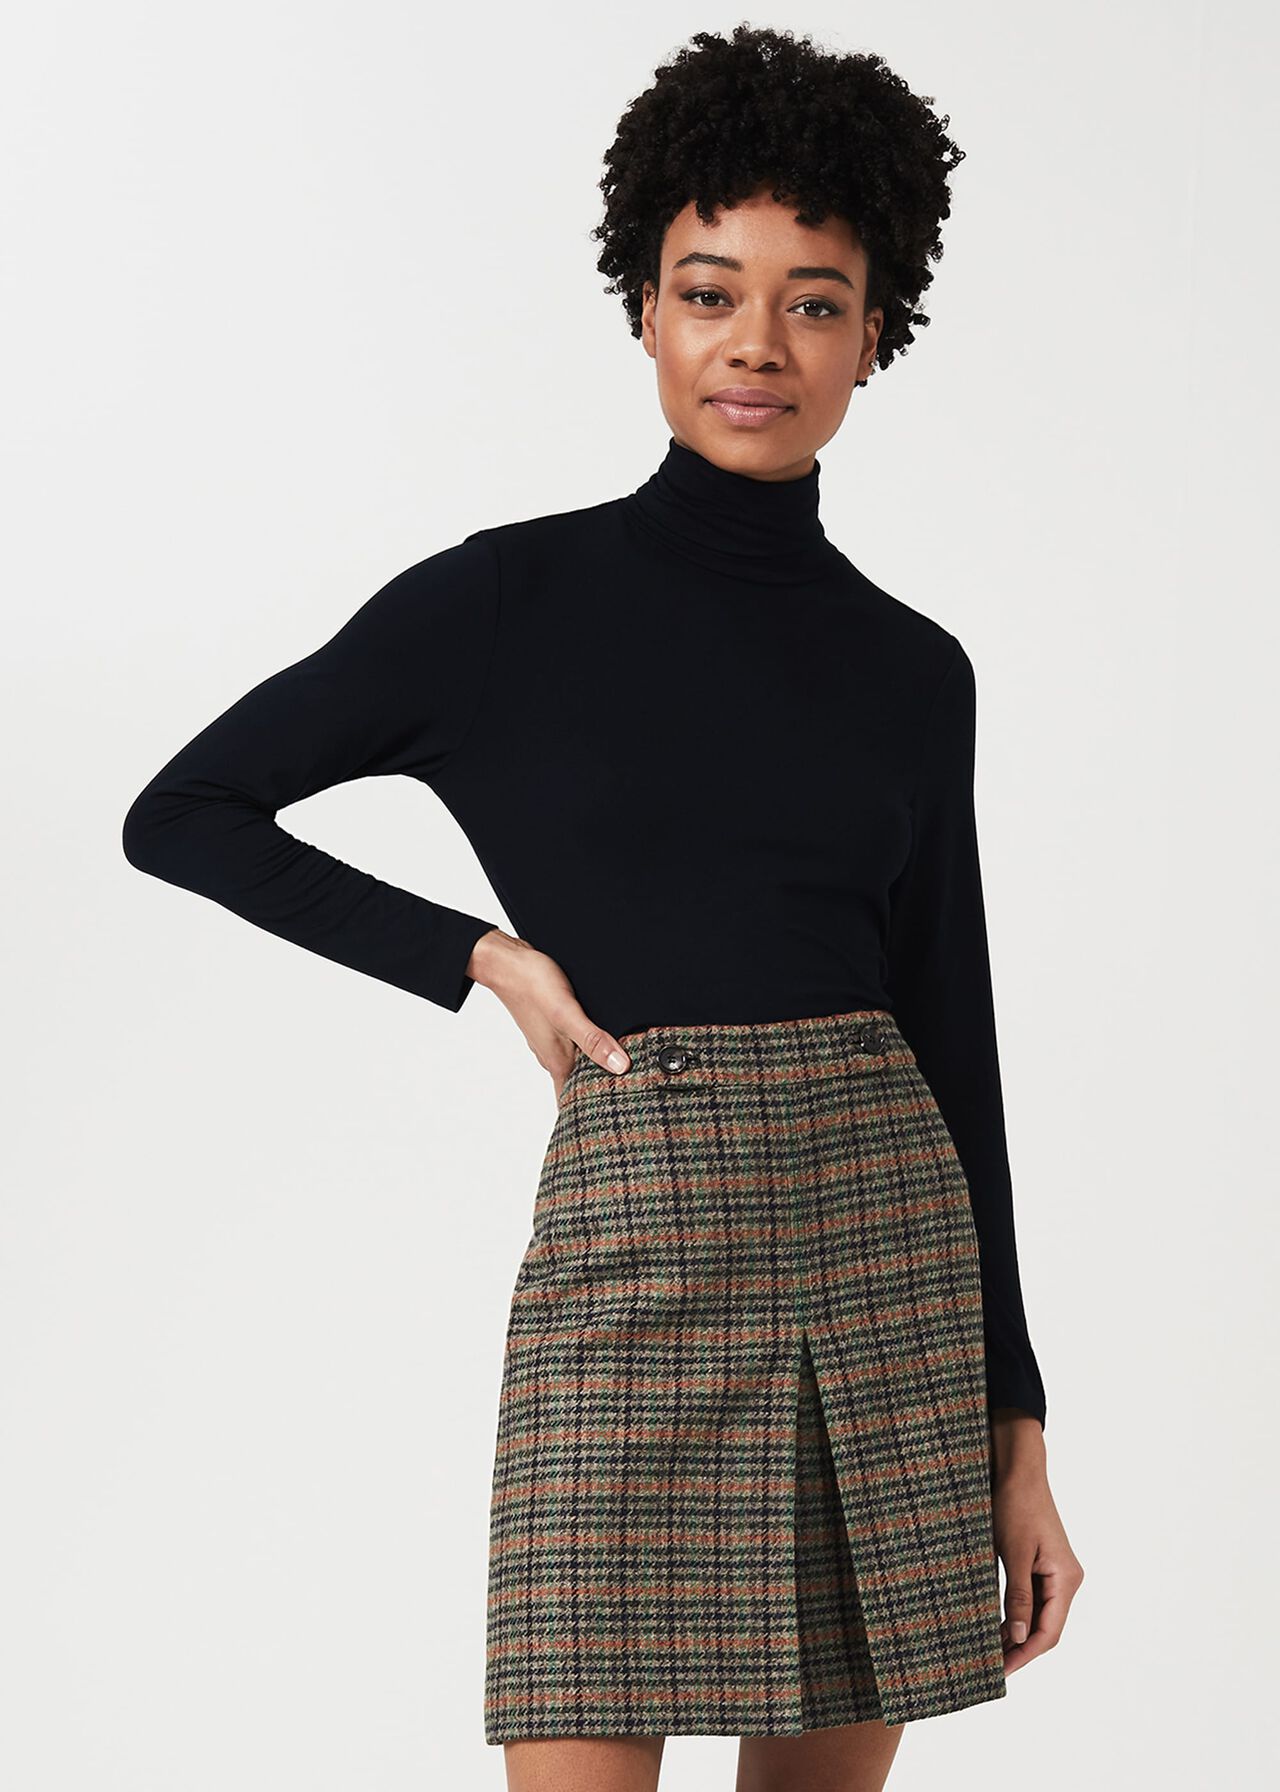 Genevieve Wool Check A Line Skirt, Camel Multi, hi-res